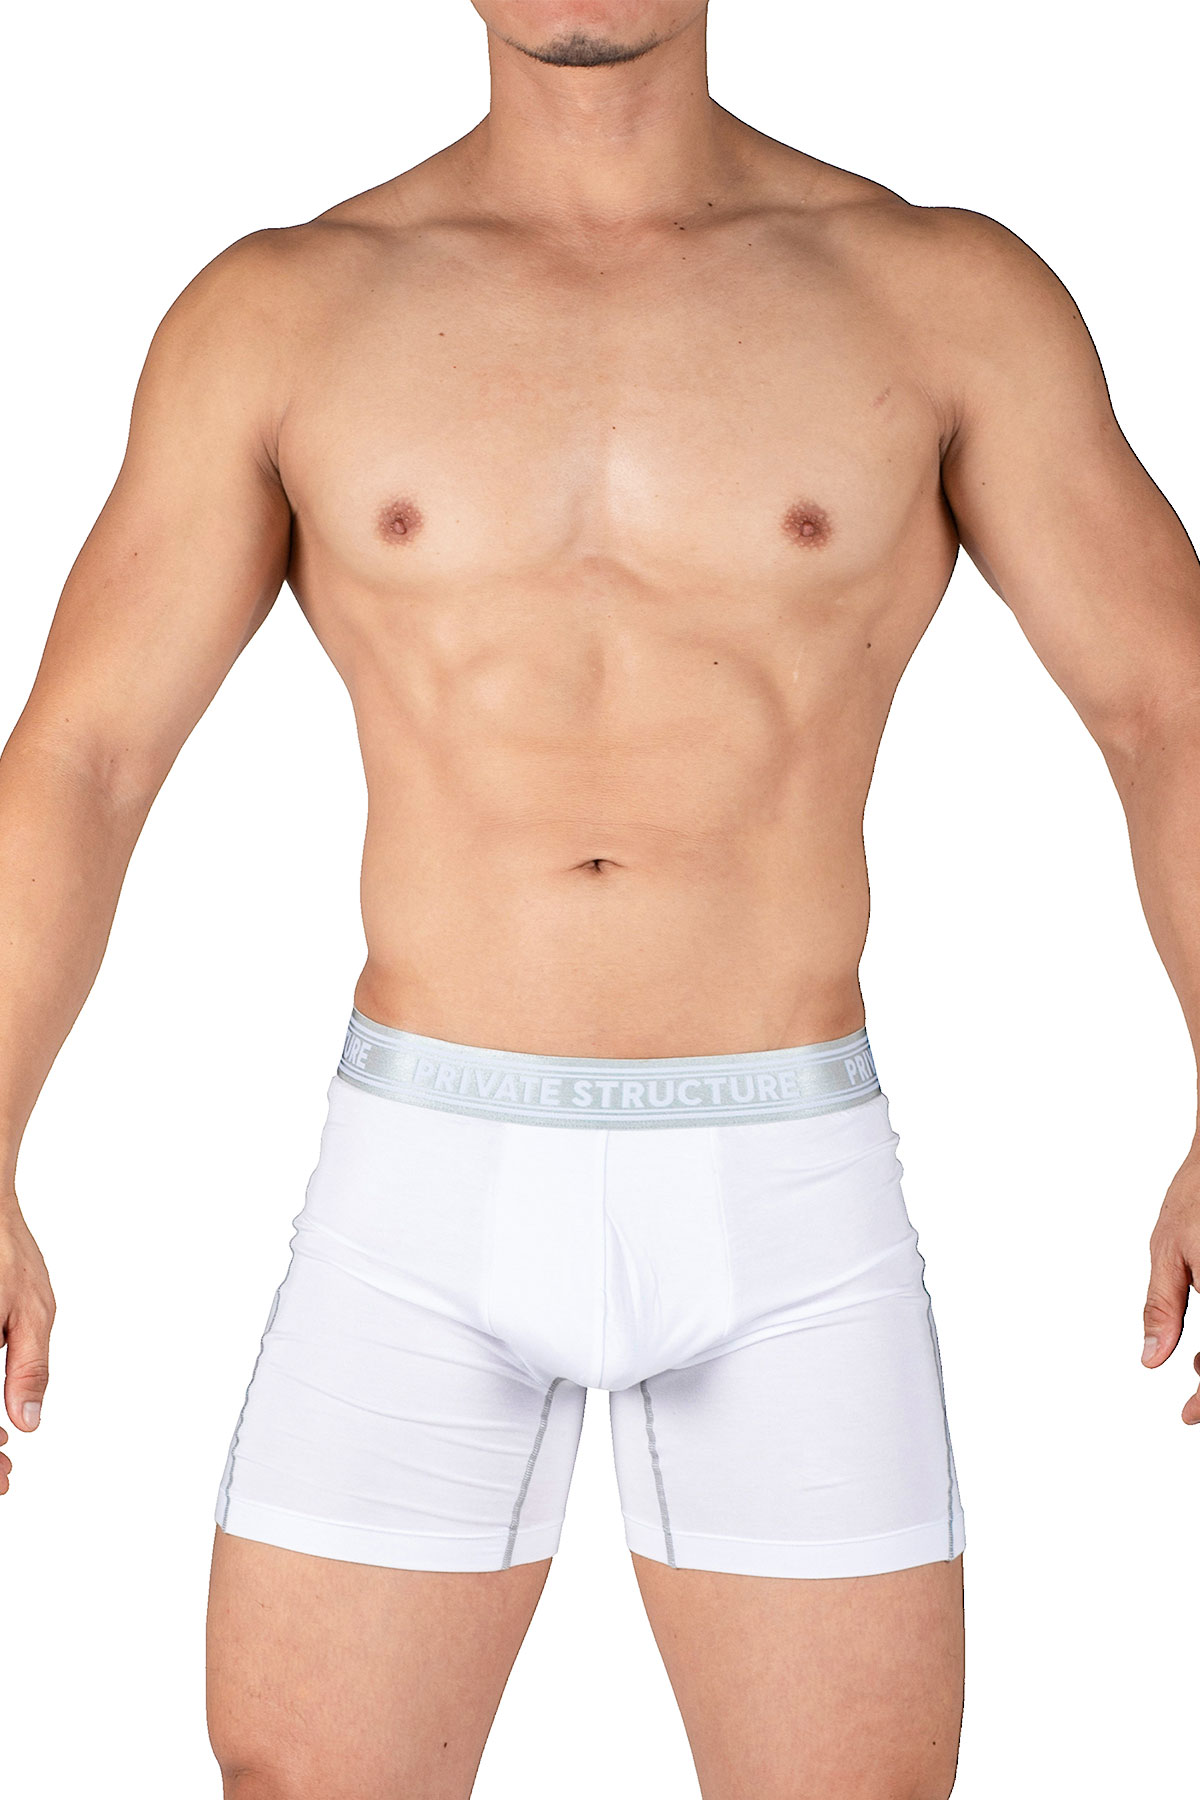 How to wear the support briefs? 